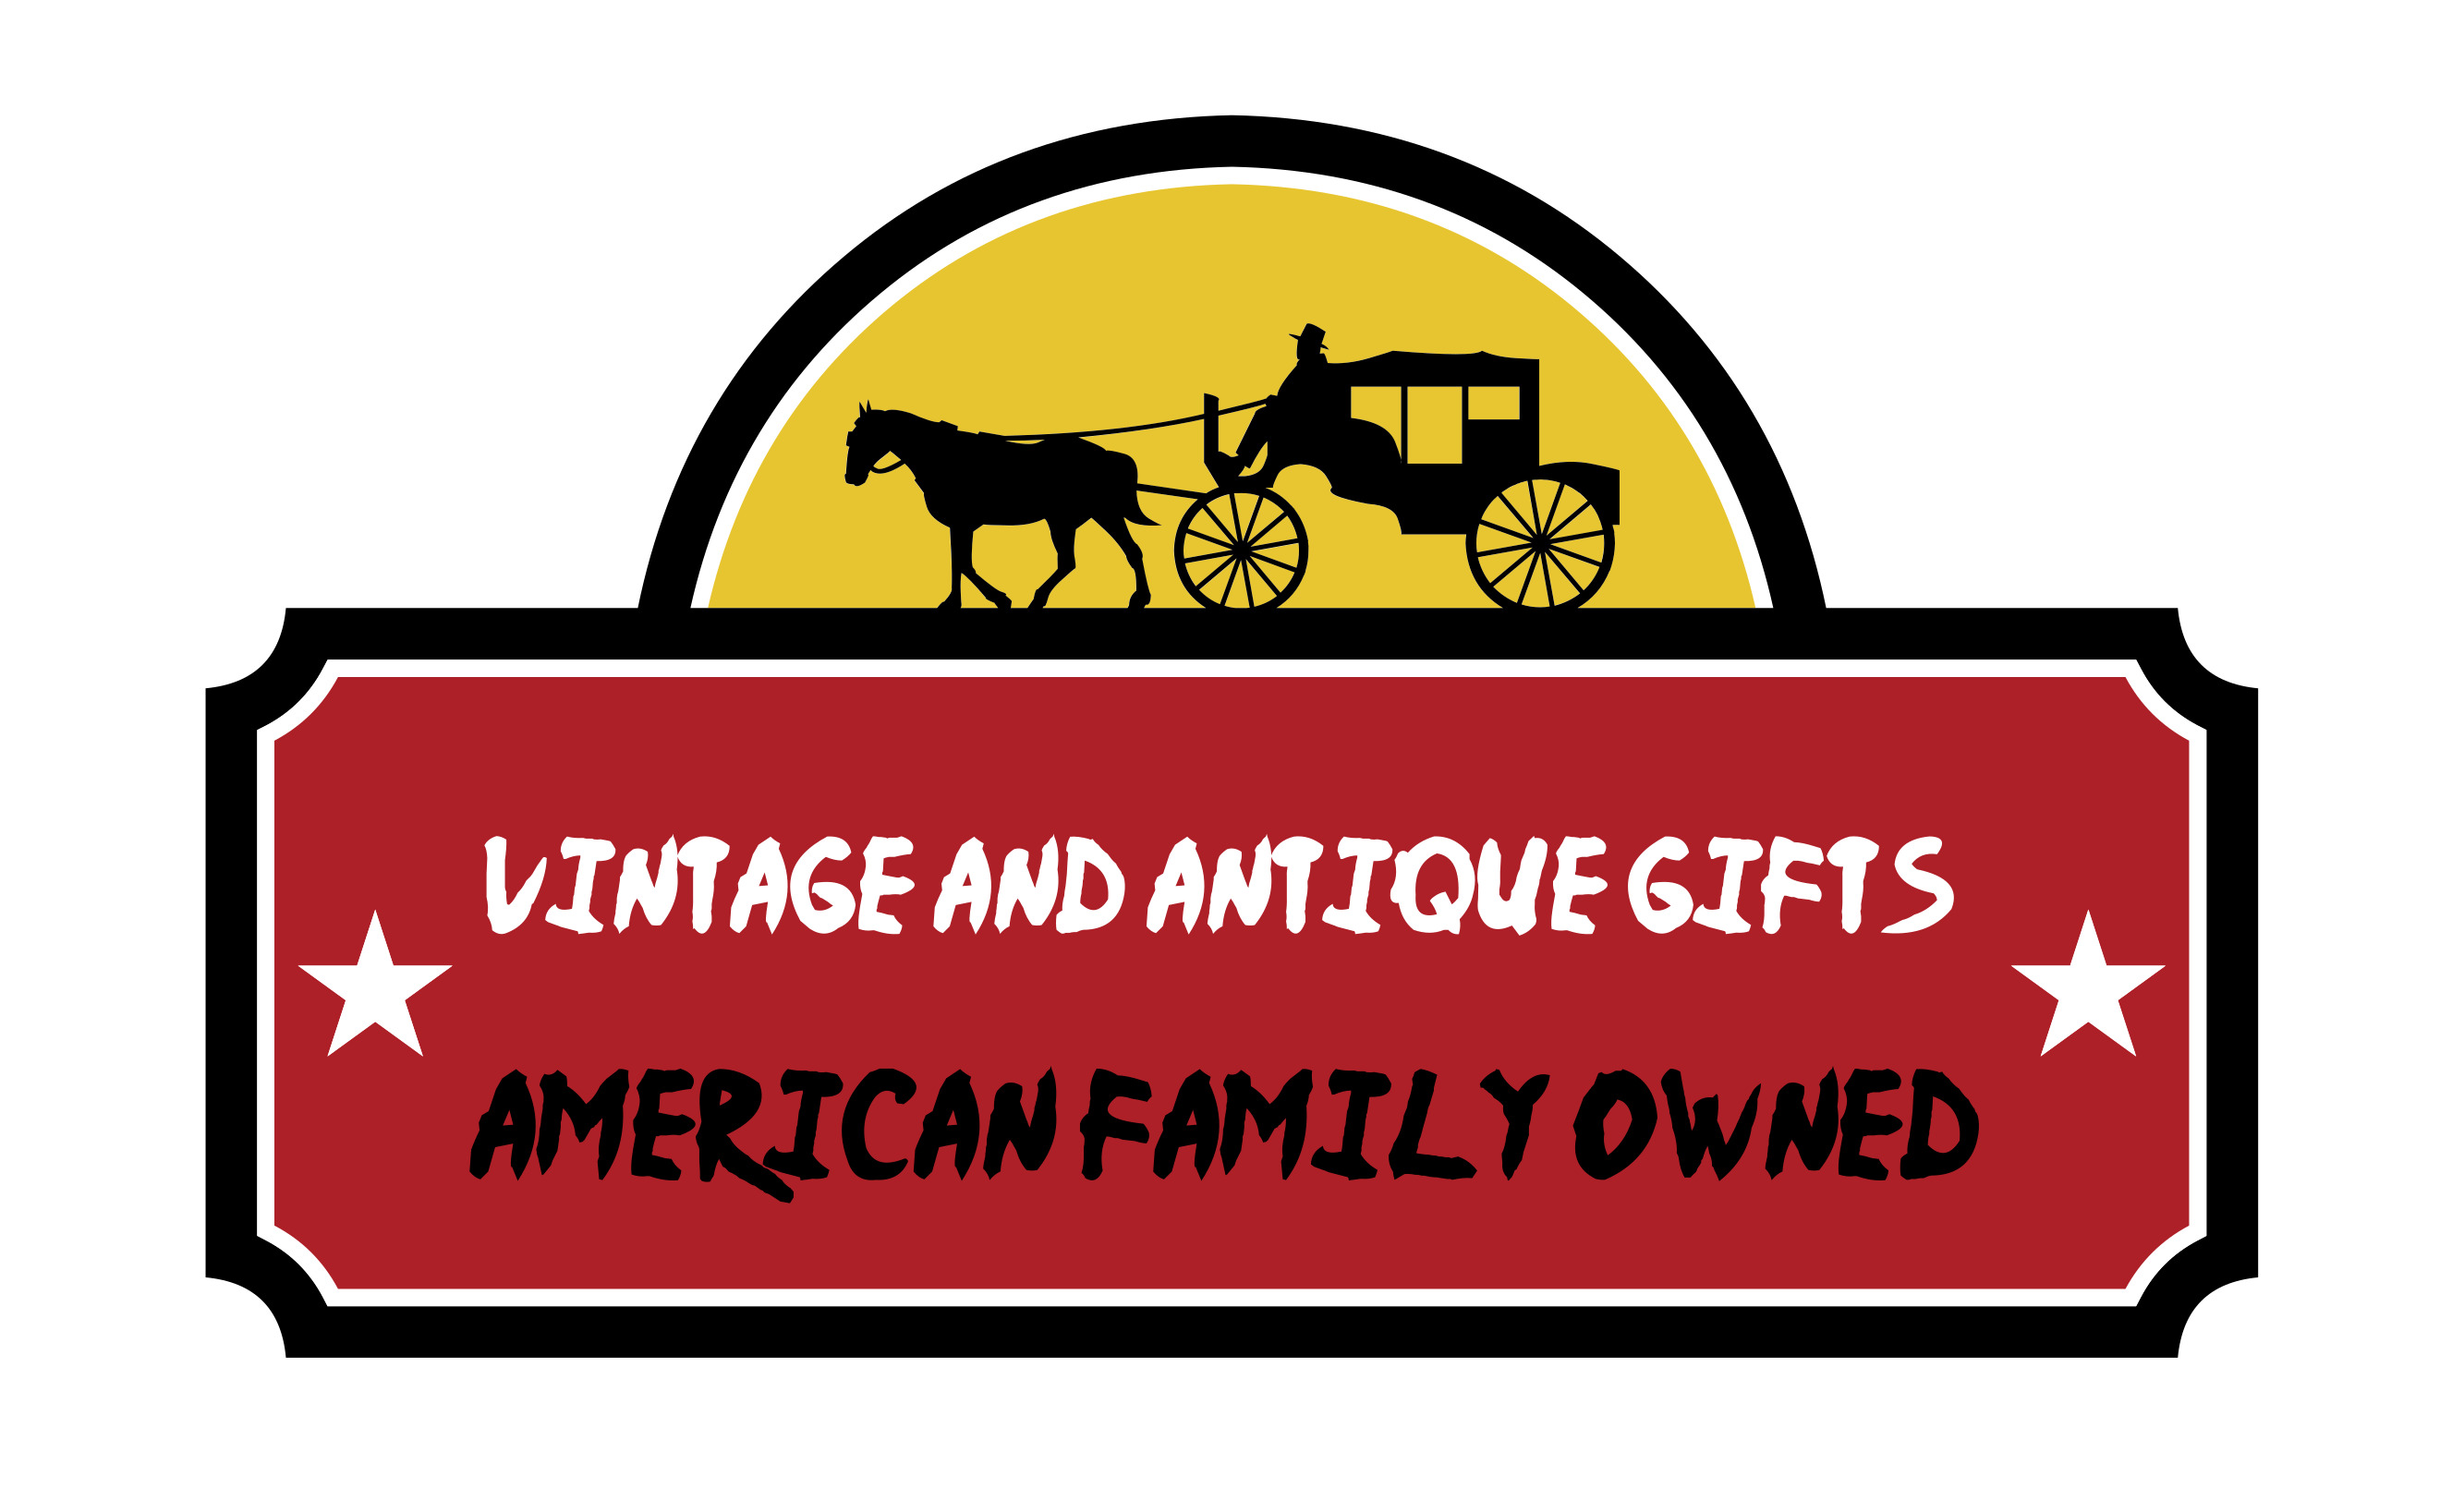 Vintage and Antique Gifts review